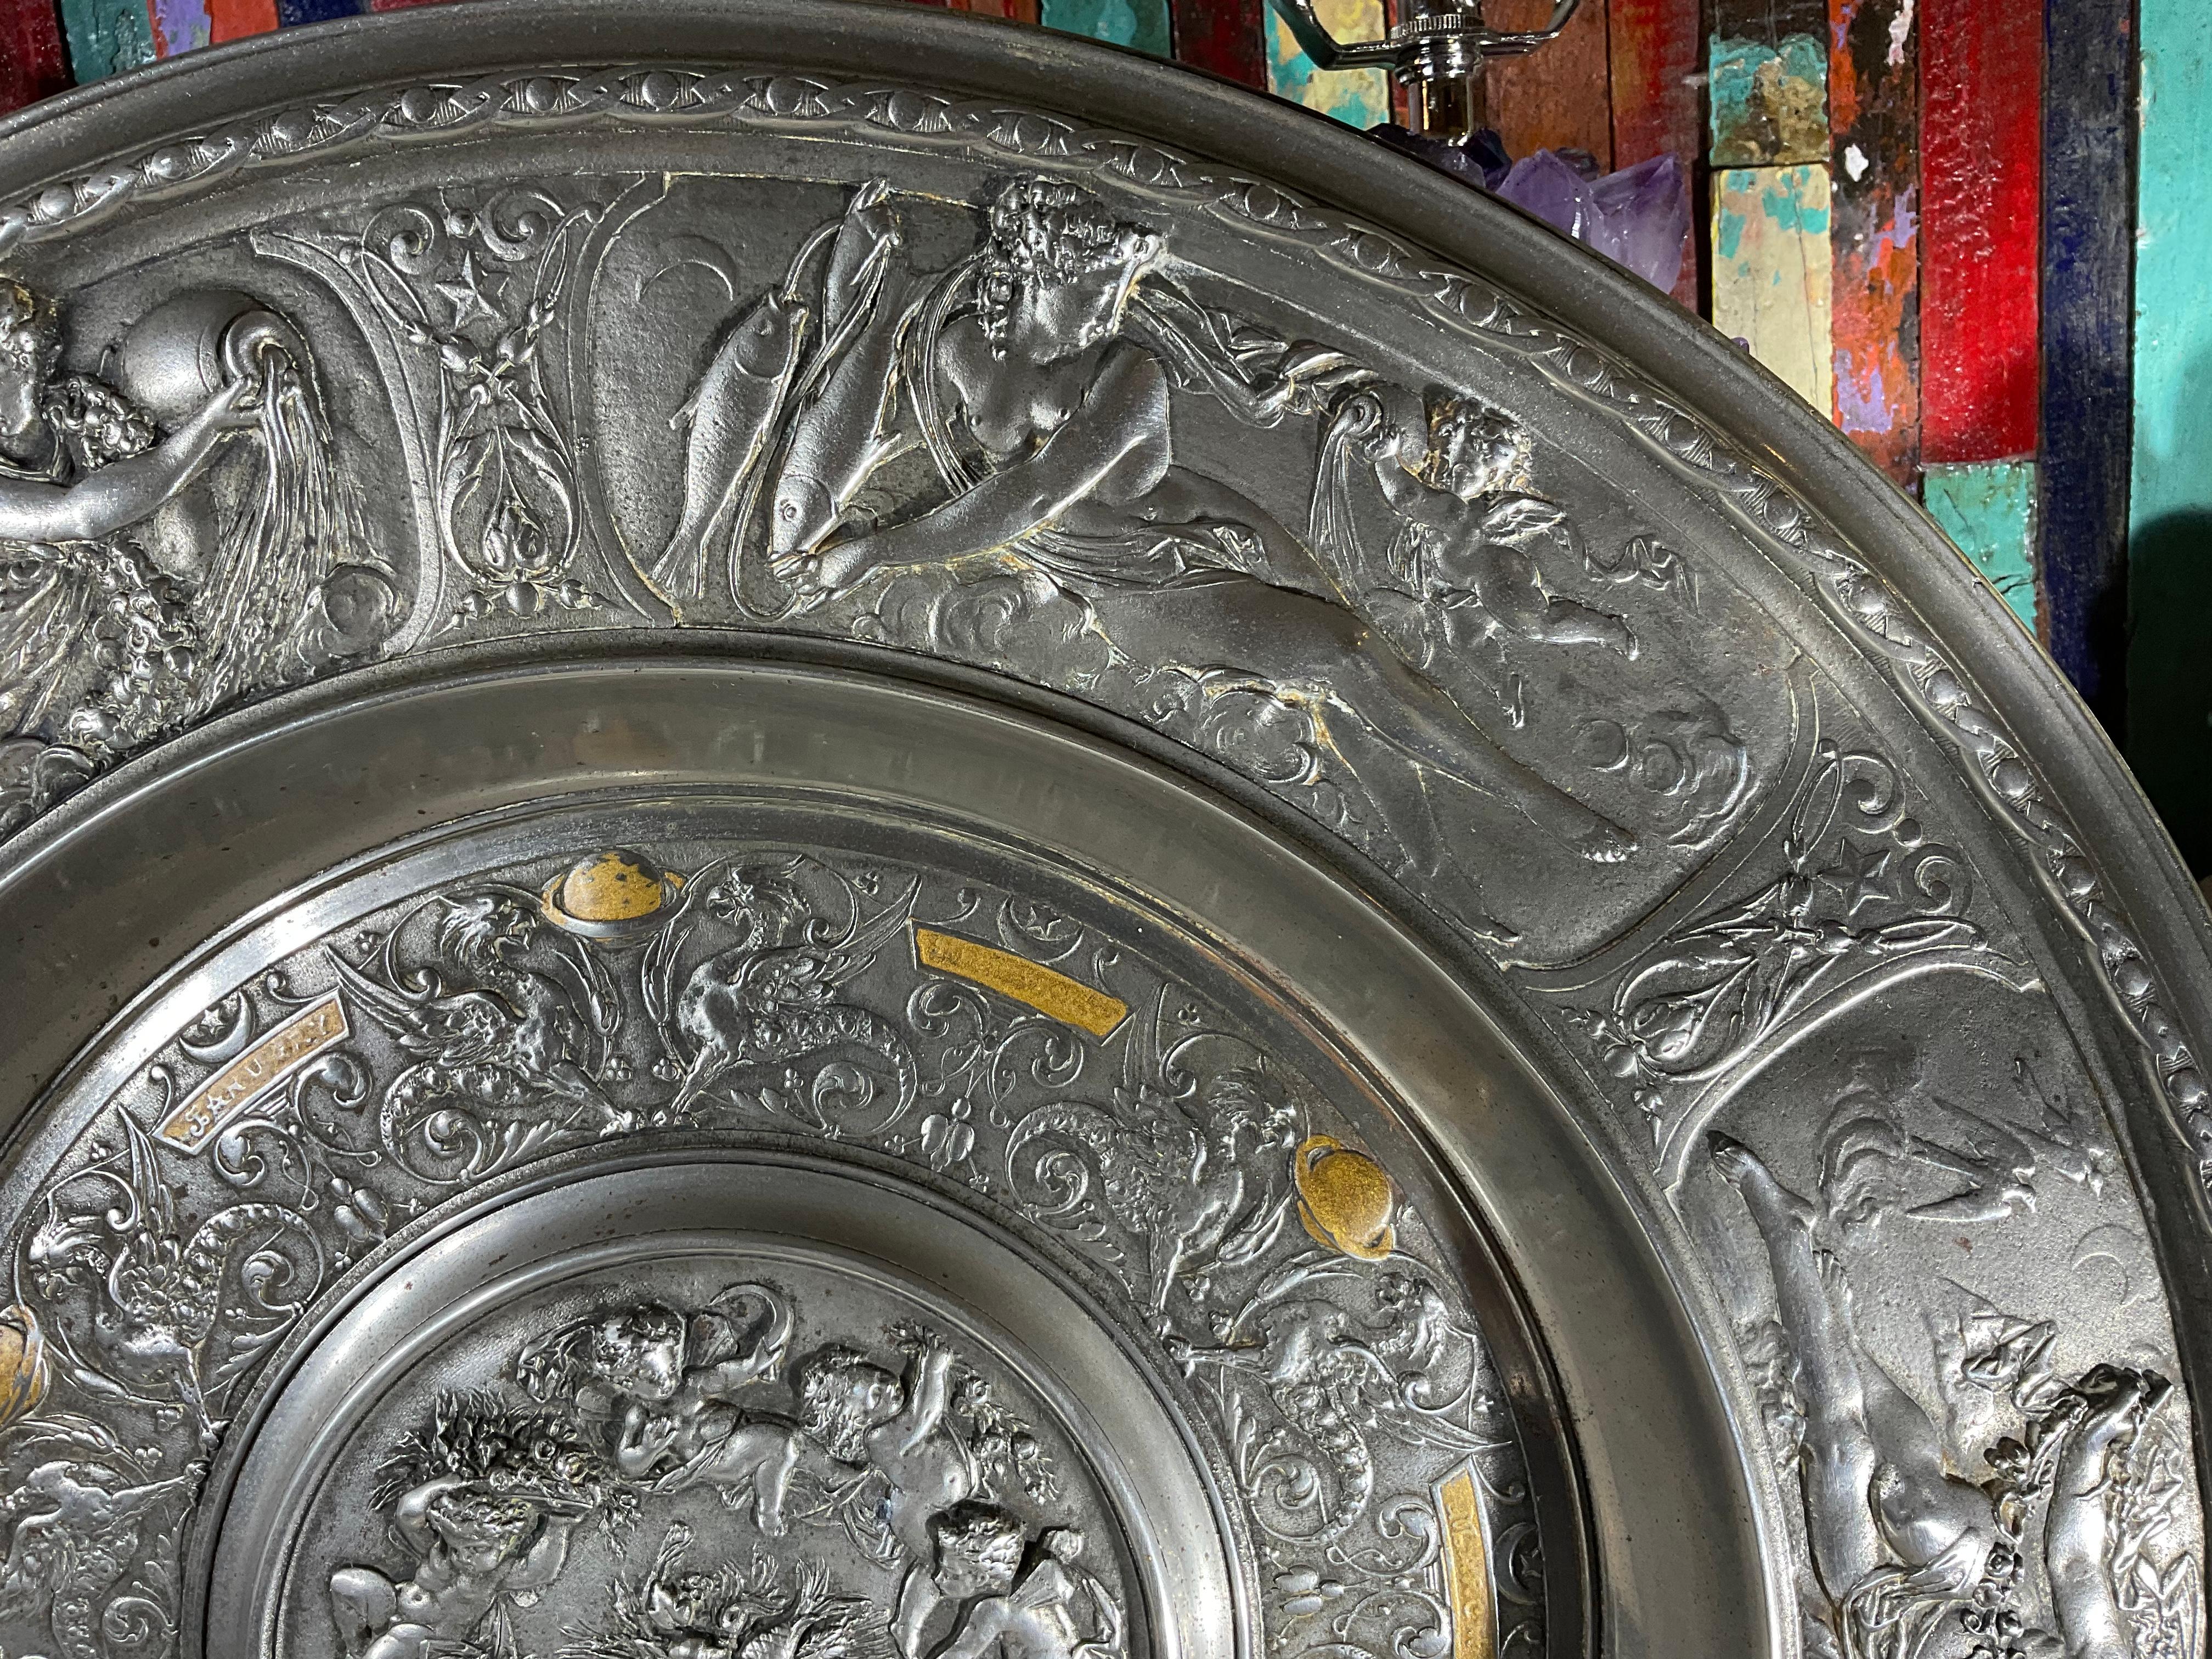 Beautiful round wall relief plate or center table tray, depicting allegoric scenes of the months of the year, decorated in figures, flowers and cartouches. Incredible fine chiseled details, made on cast metal silver plated. Could use on the table